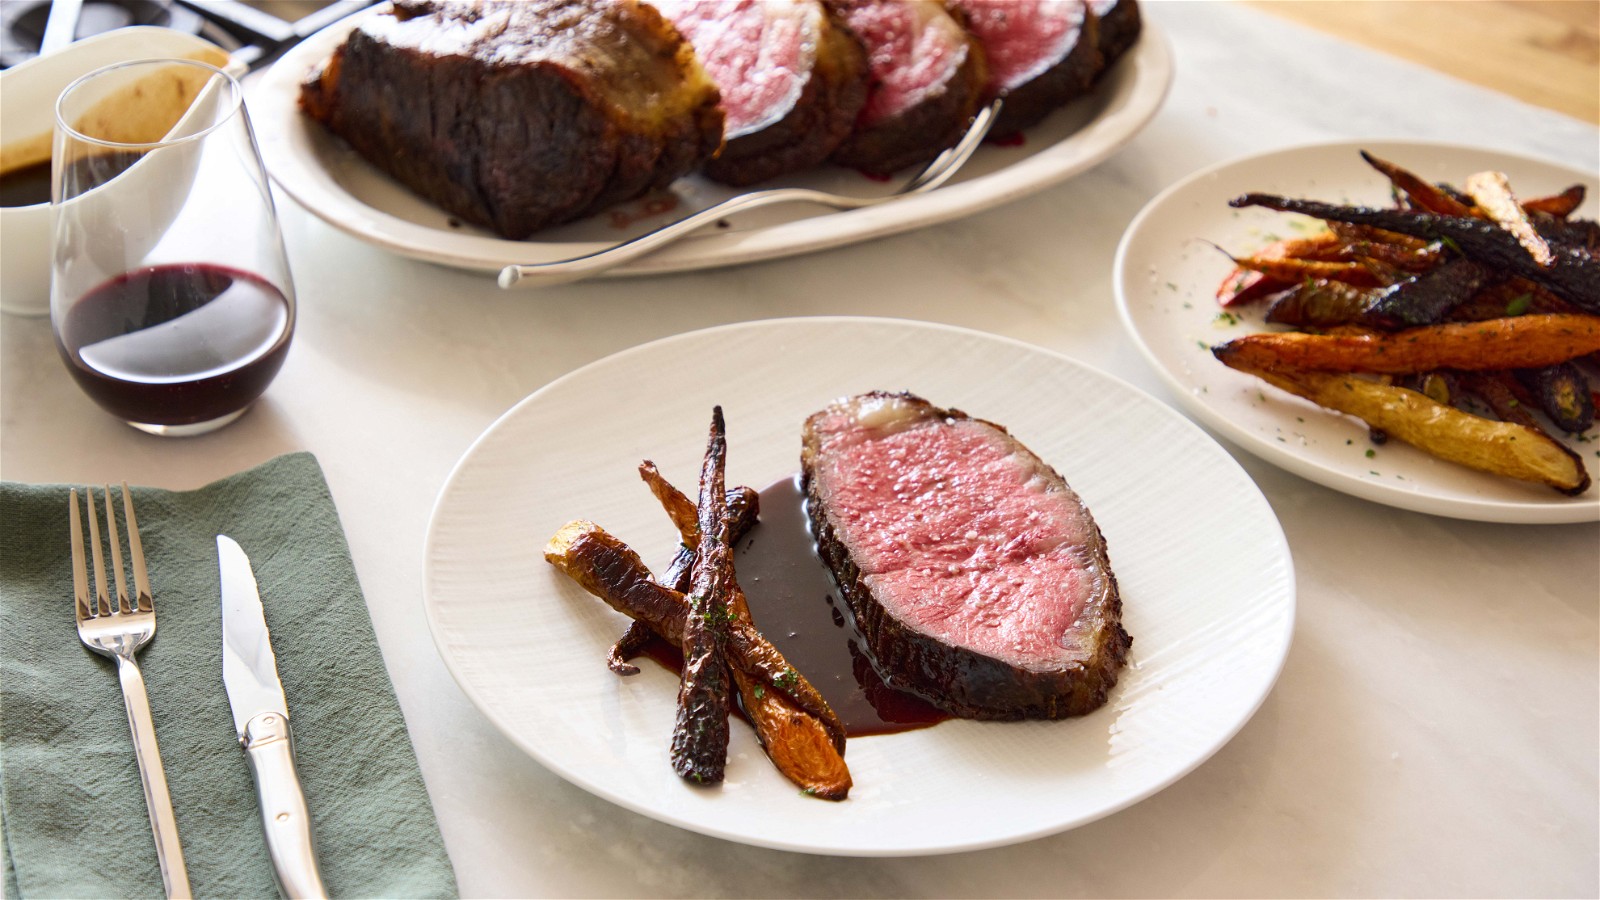 Chef Thomas Keller's Oven Roasted Prime Beef Striploin with a Red